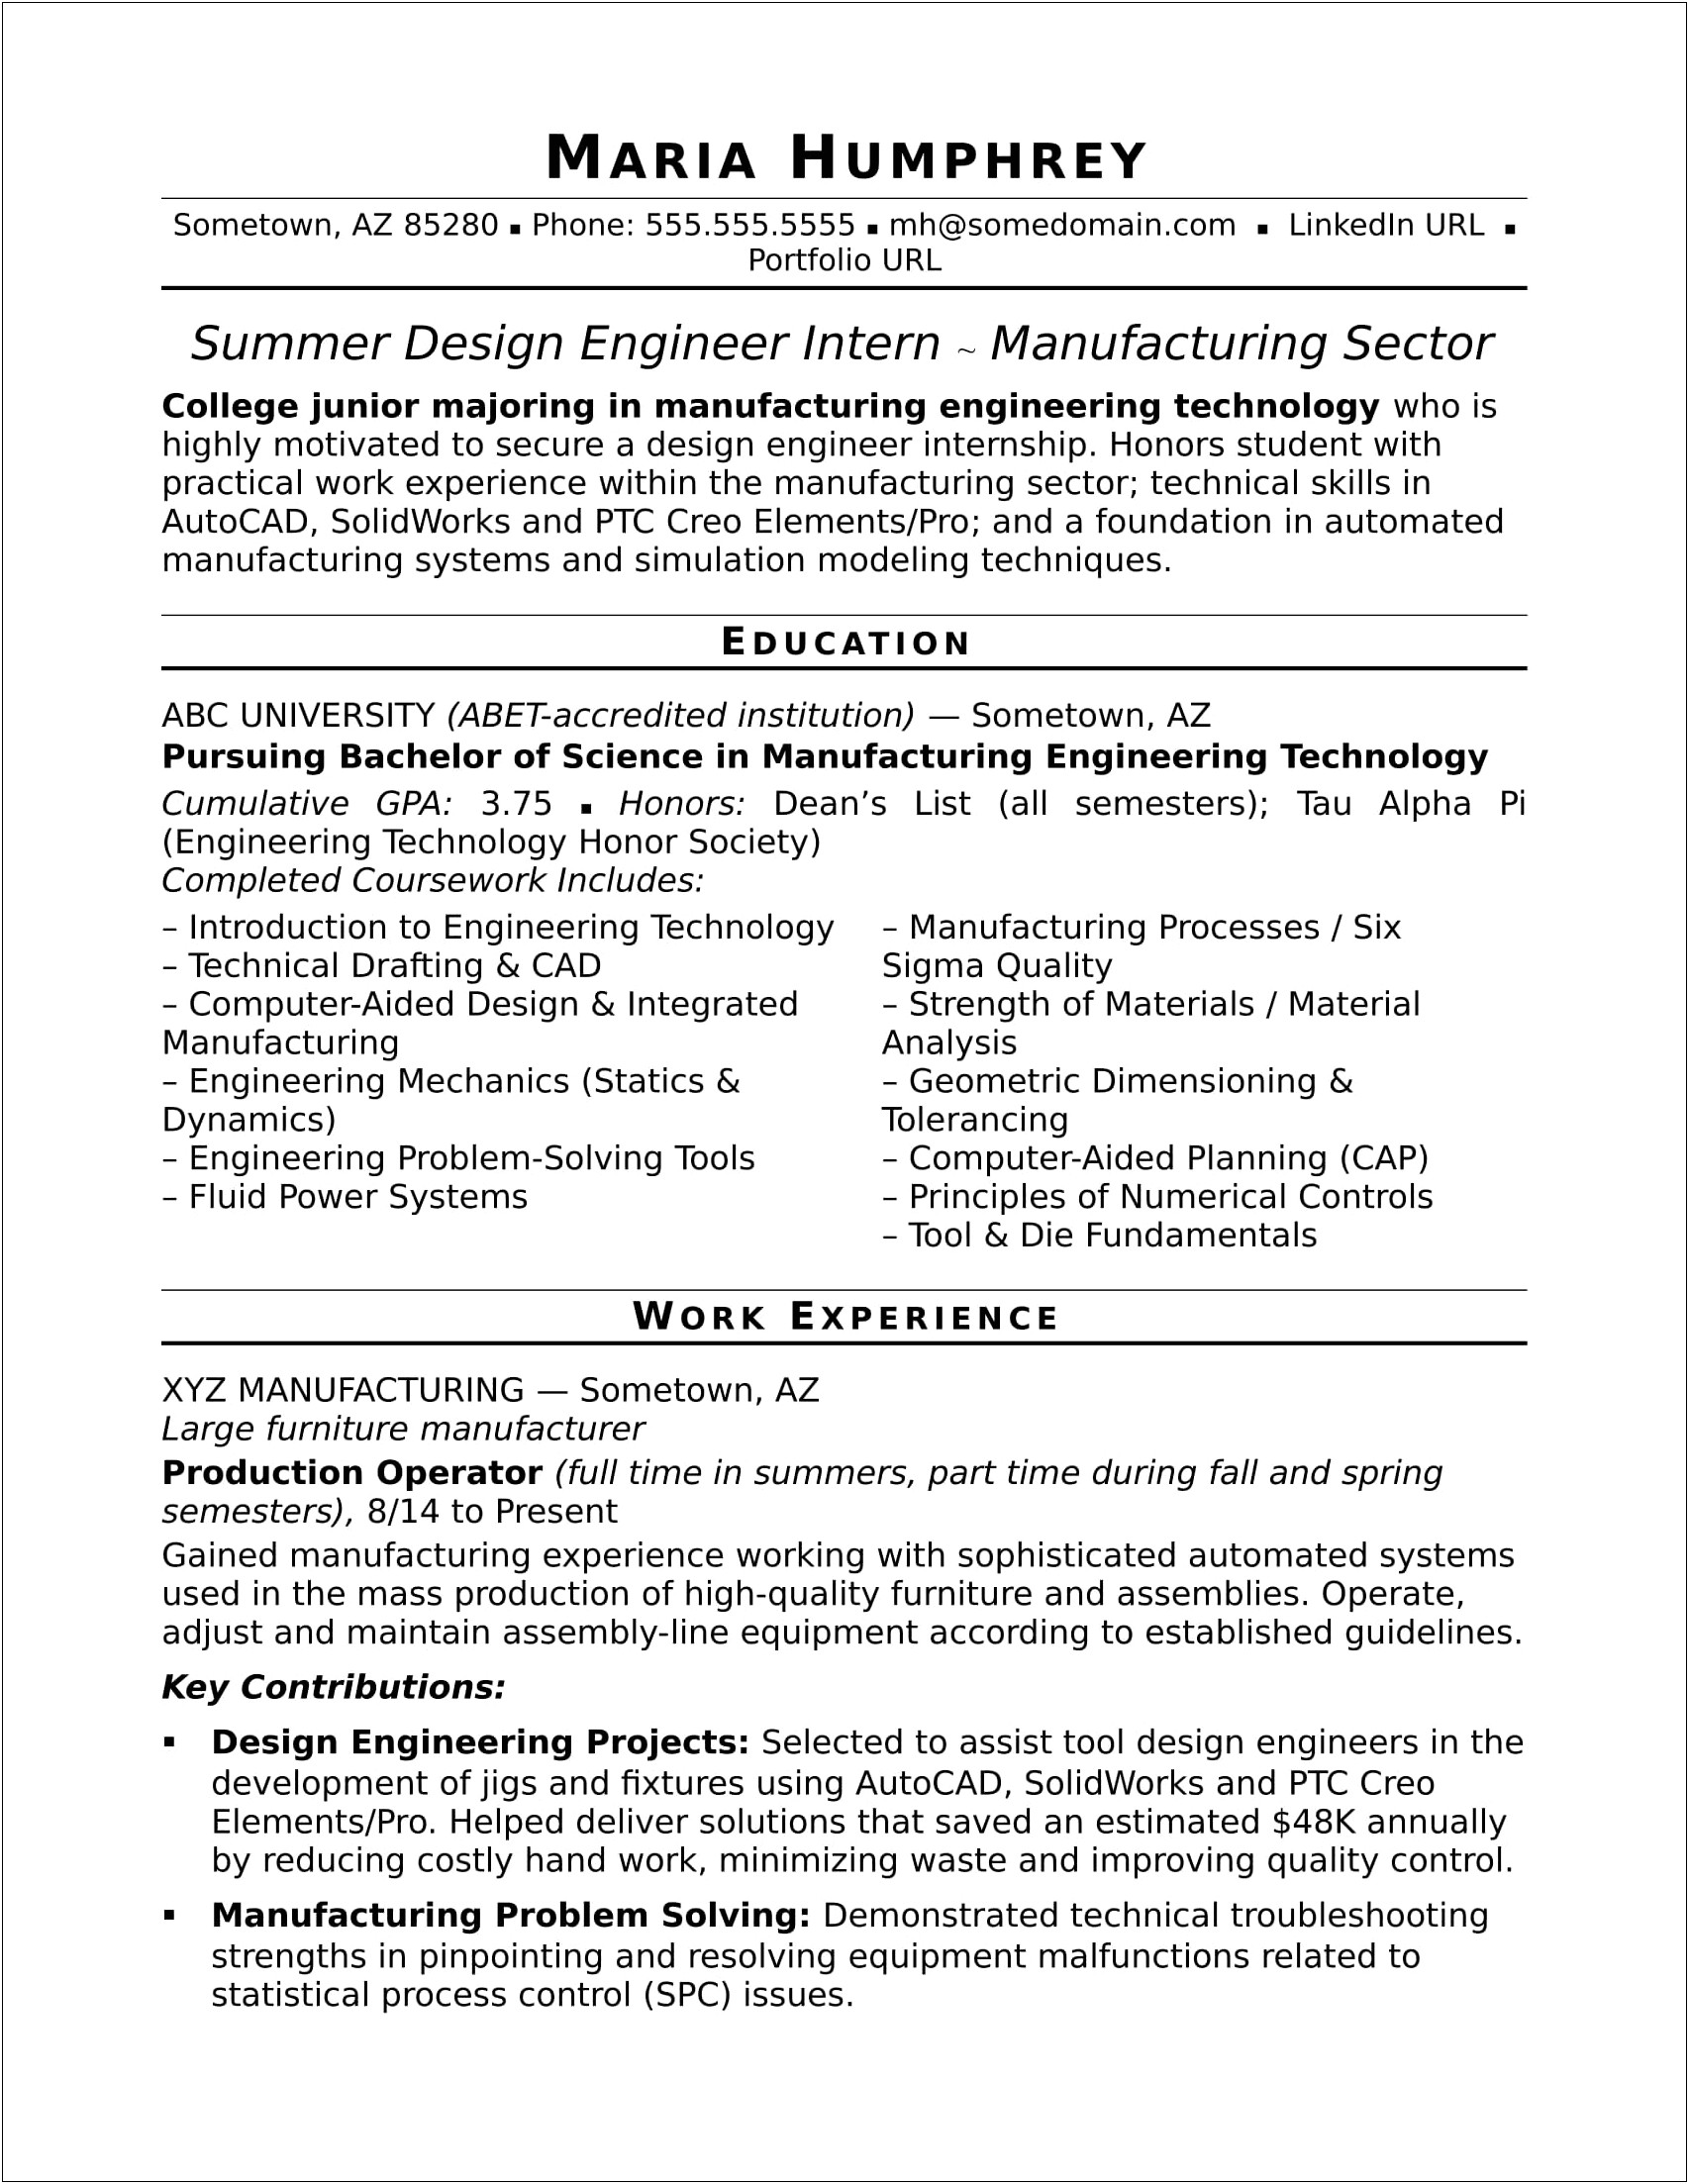 Sample Resume For A Mid Level Manufacturing Engineer